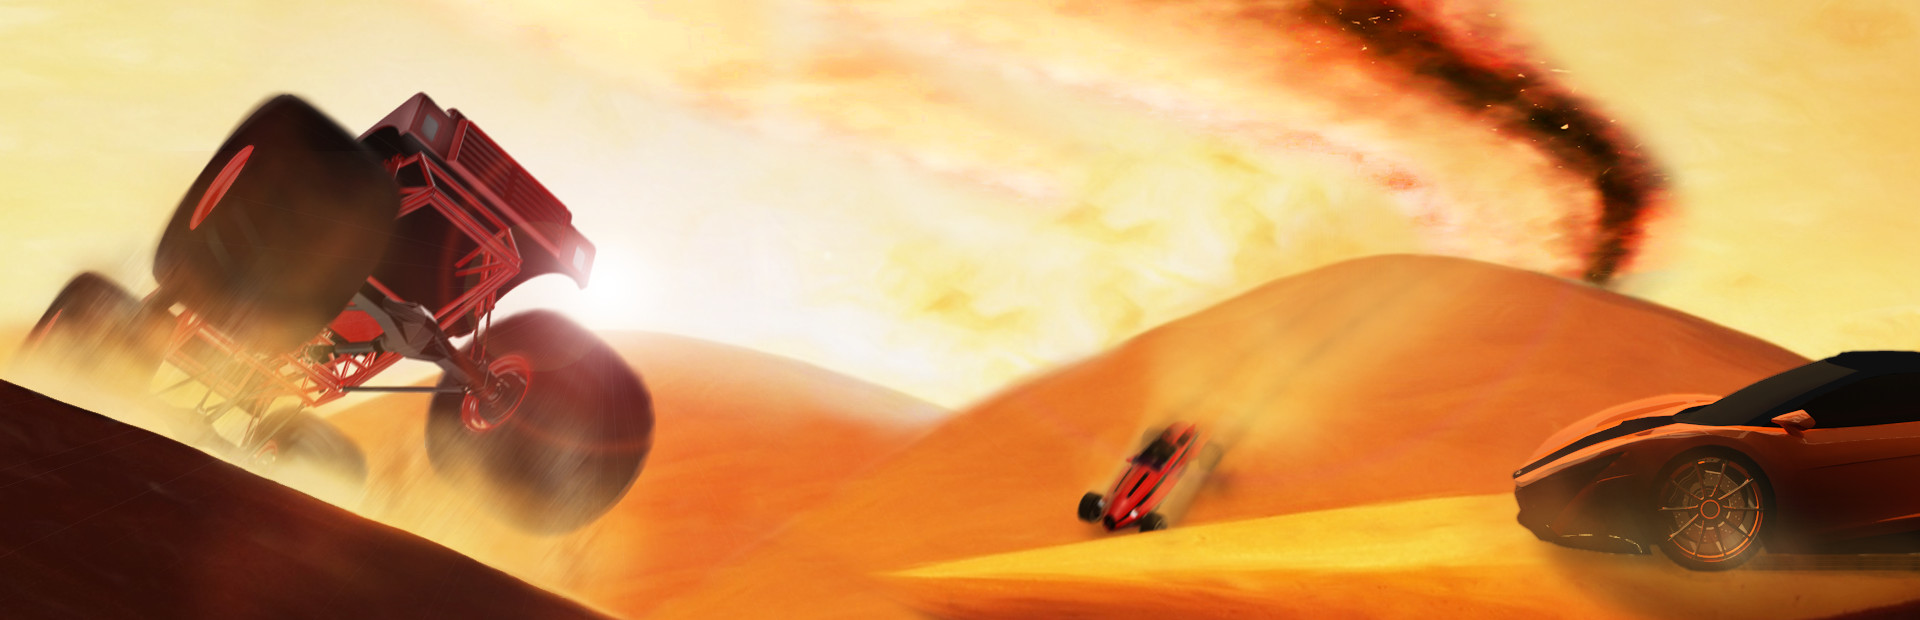 Top Down Racer cover image